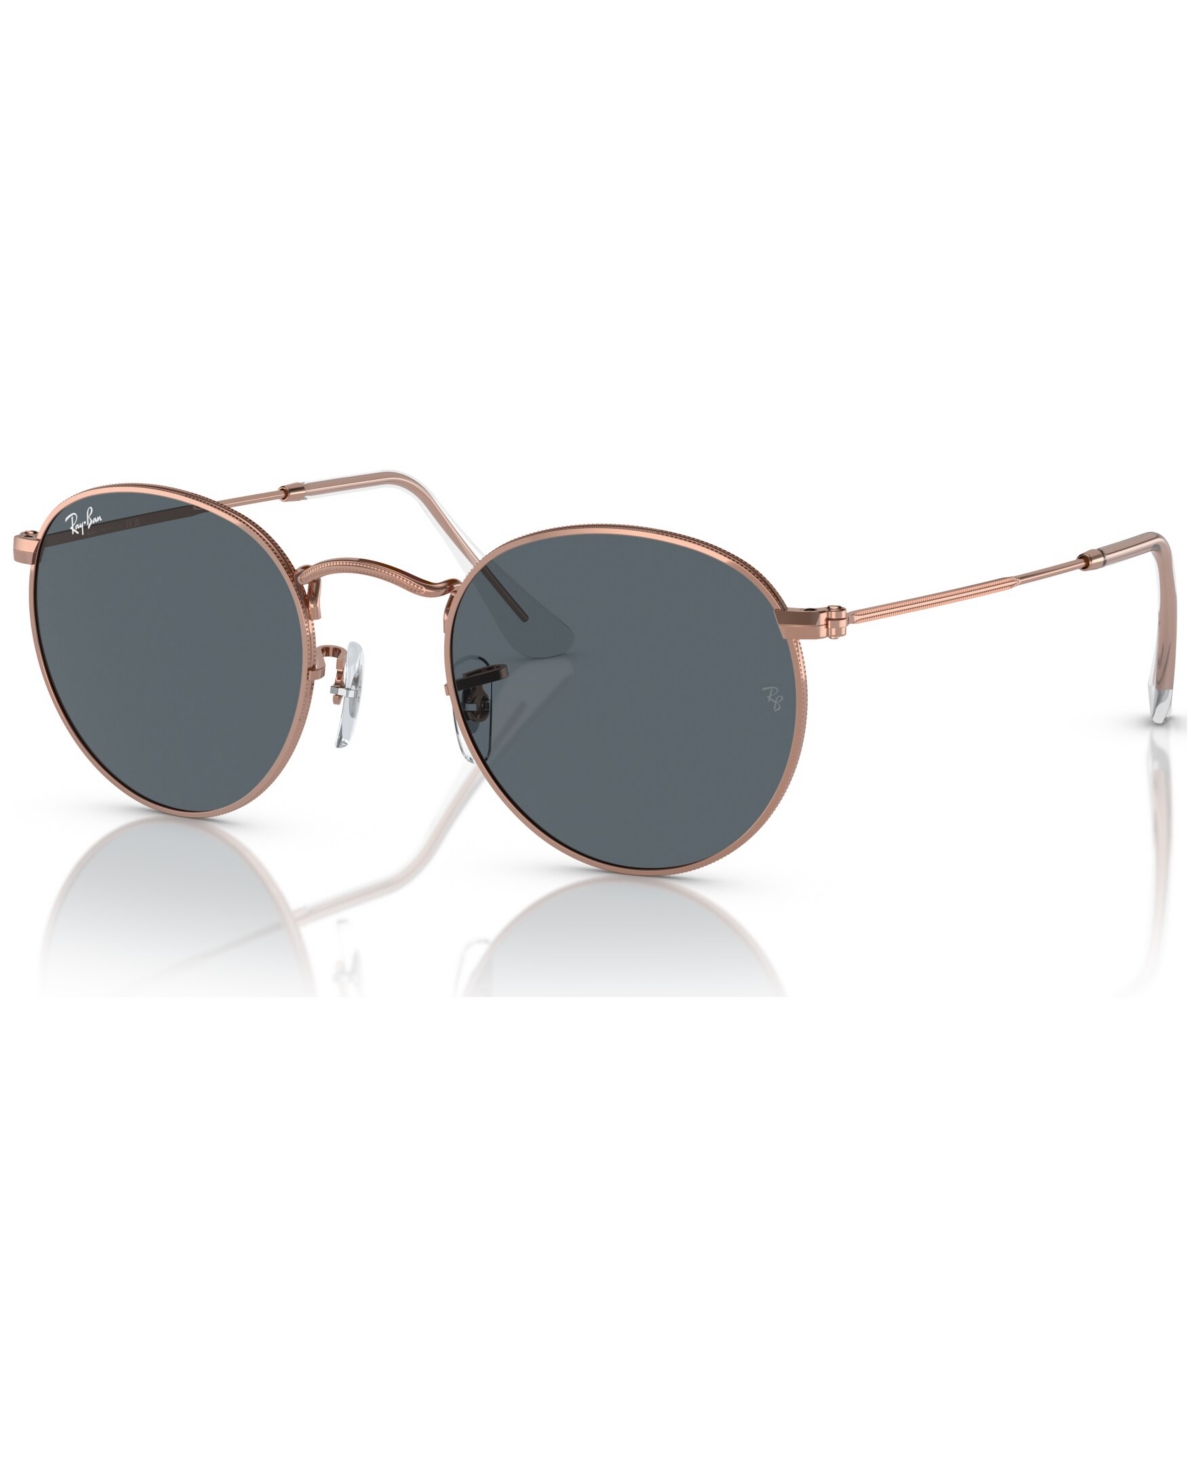 Ray Ban Unisex Sunglasses, Rb3447 Round Metal In Rose Gold Tone